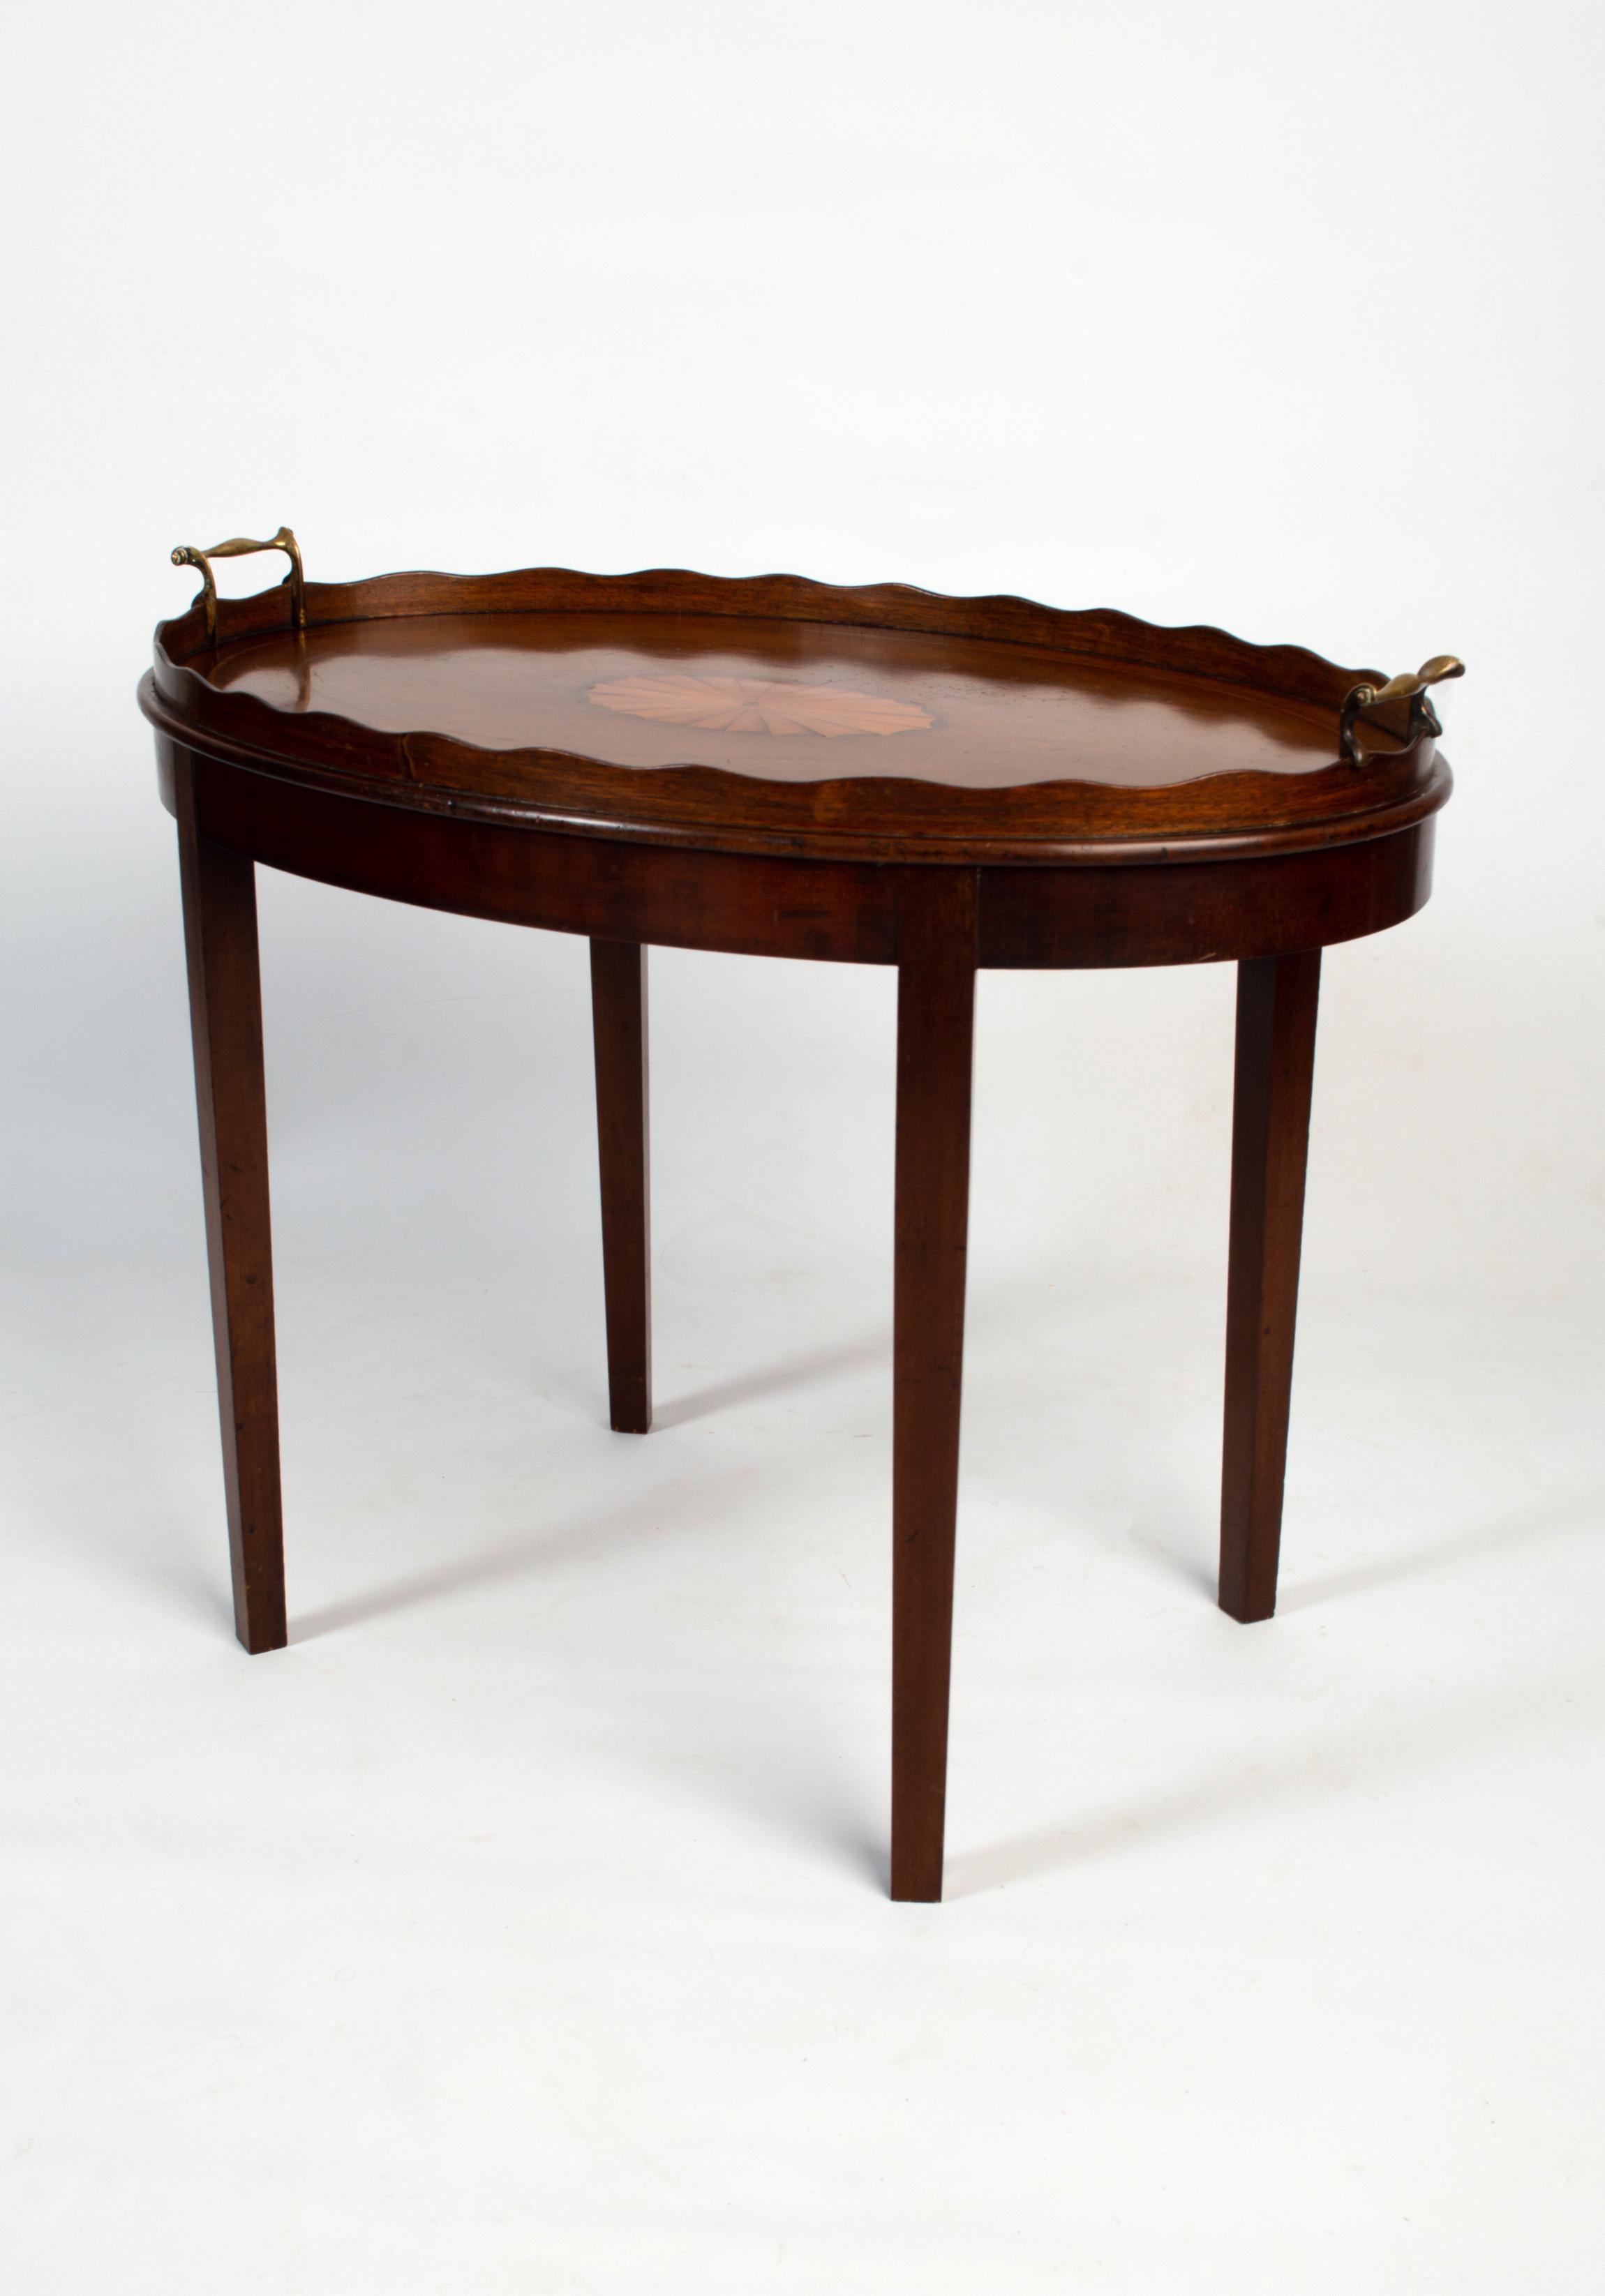 Antique English 19th Century Sheraton Revival Mahogany Tray Table In Good Condition For Sale In London, GB